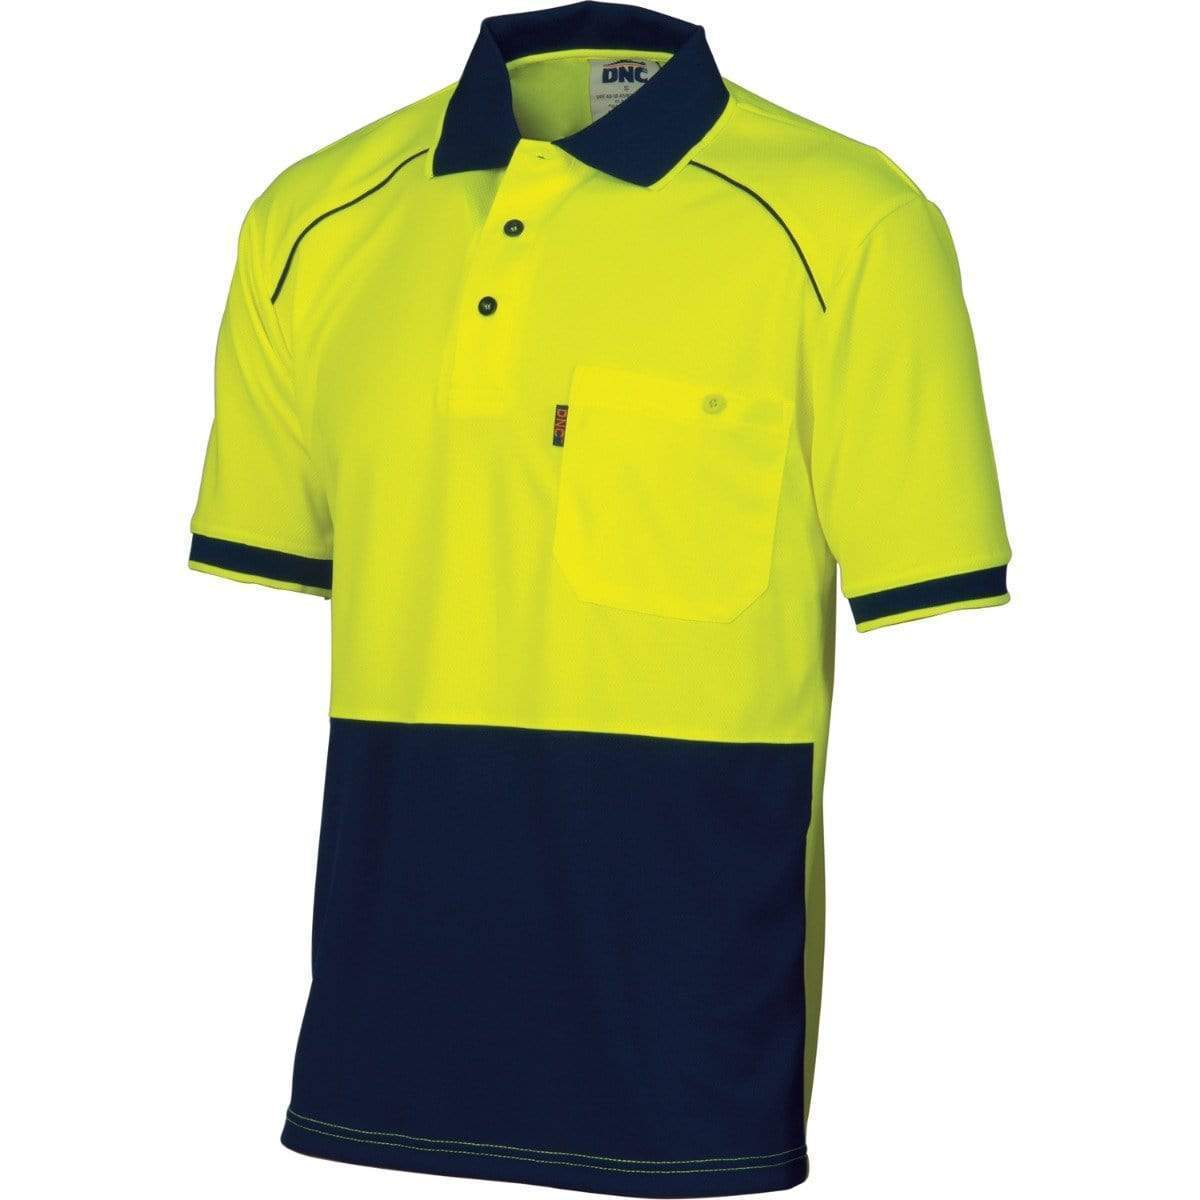 DNC Workwear Work Wear Yellow/Navy / 5XL DNC WORKWEAR Hi-Vis Cool-Breathe Front Piping Short Sleeve Polo 3754